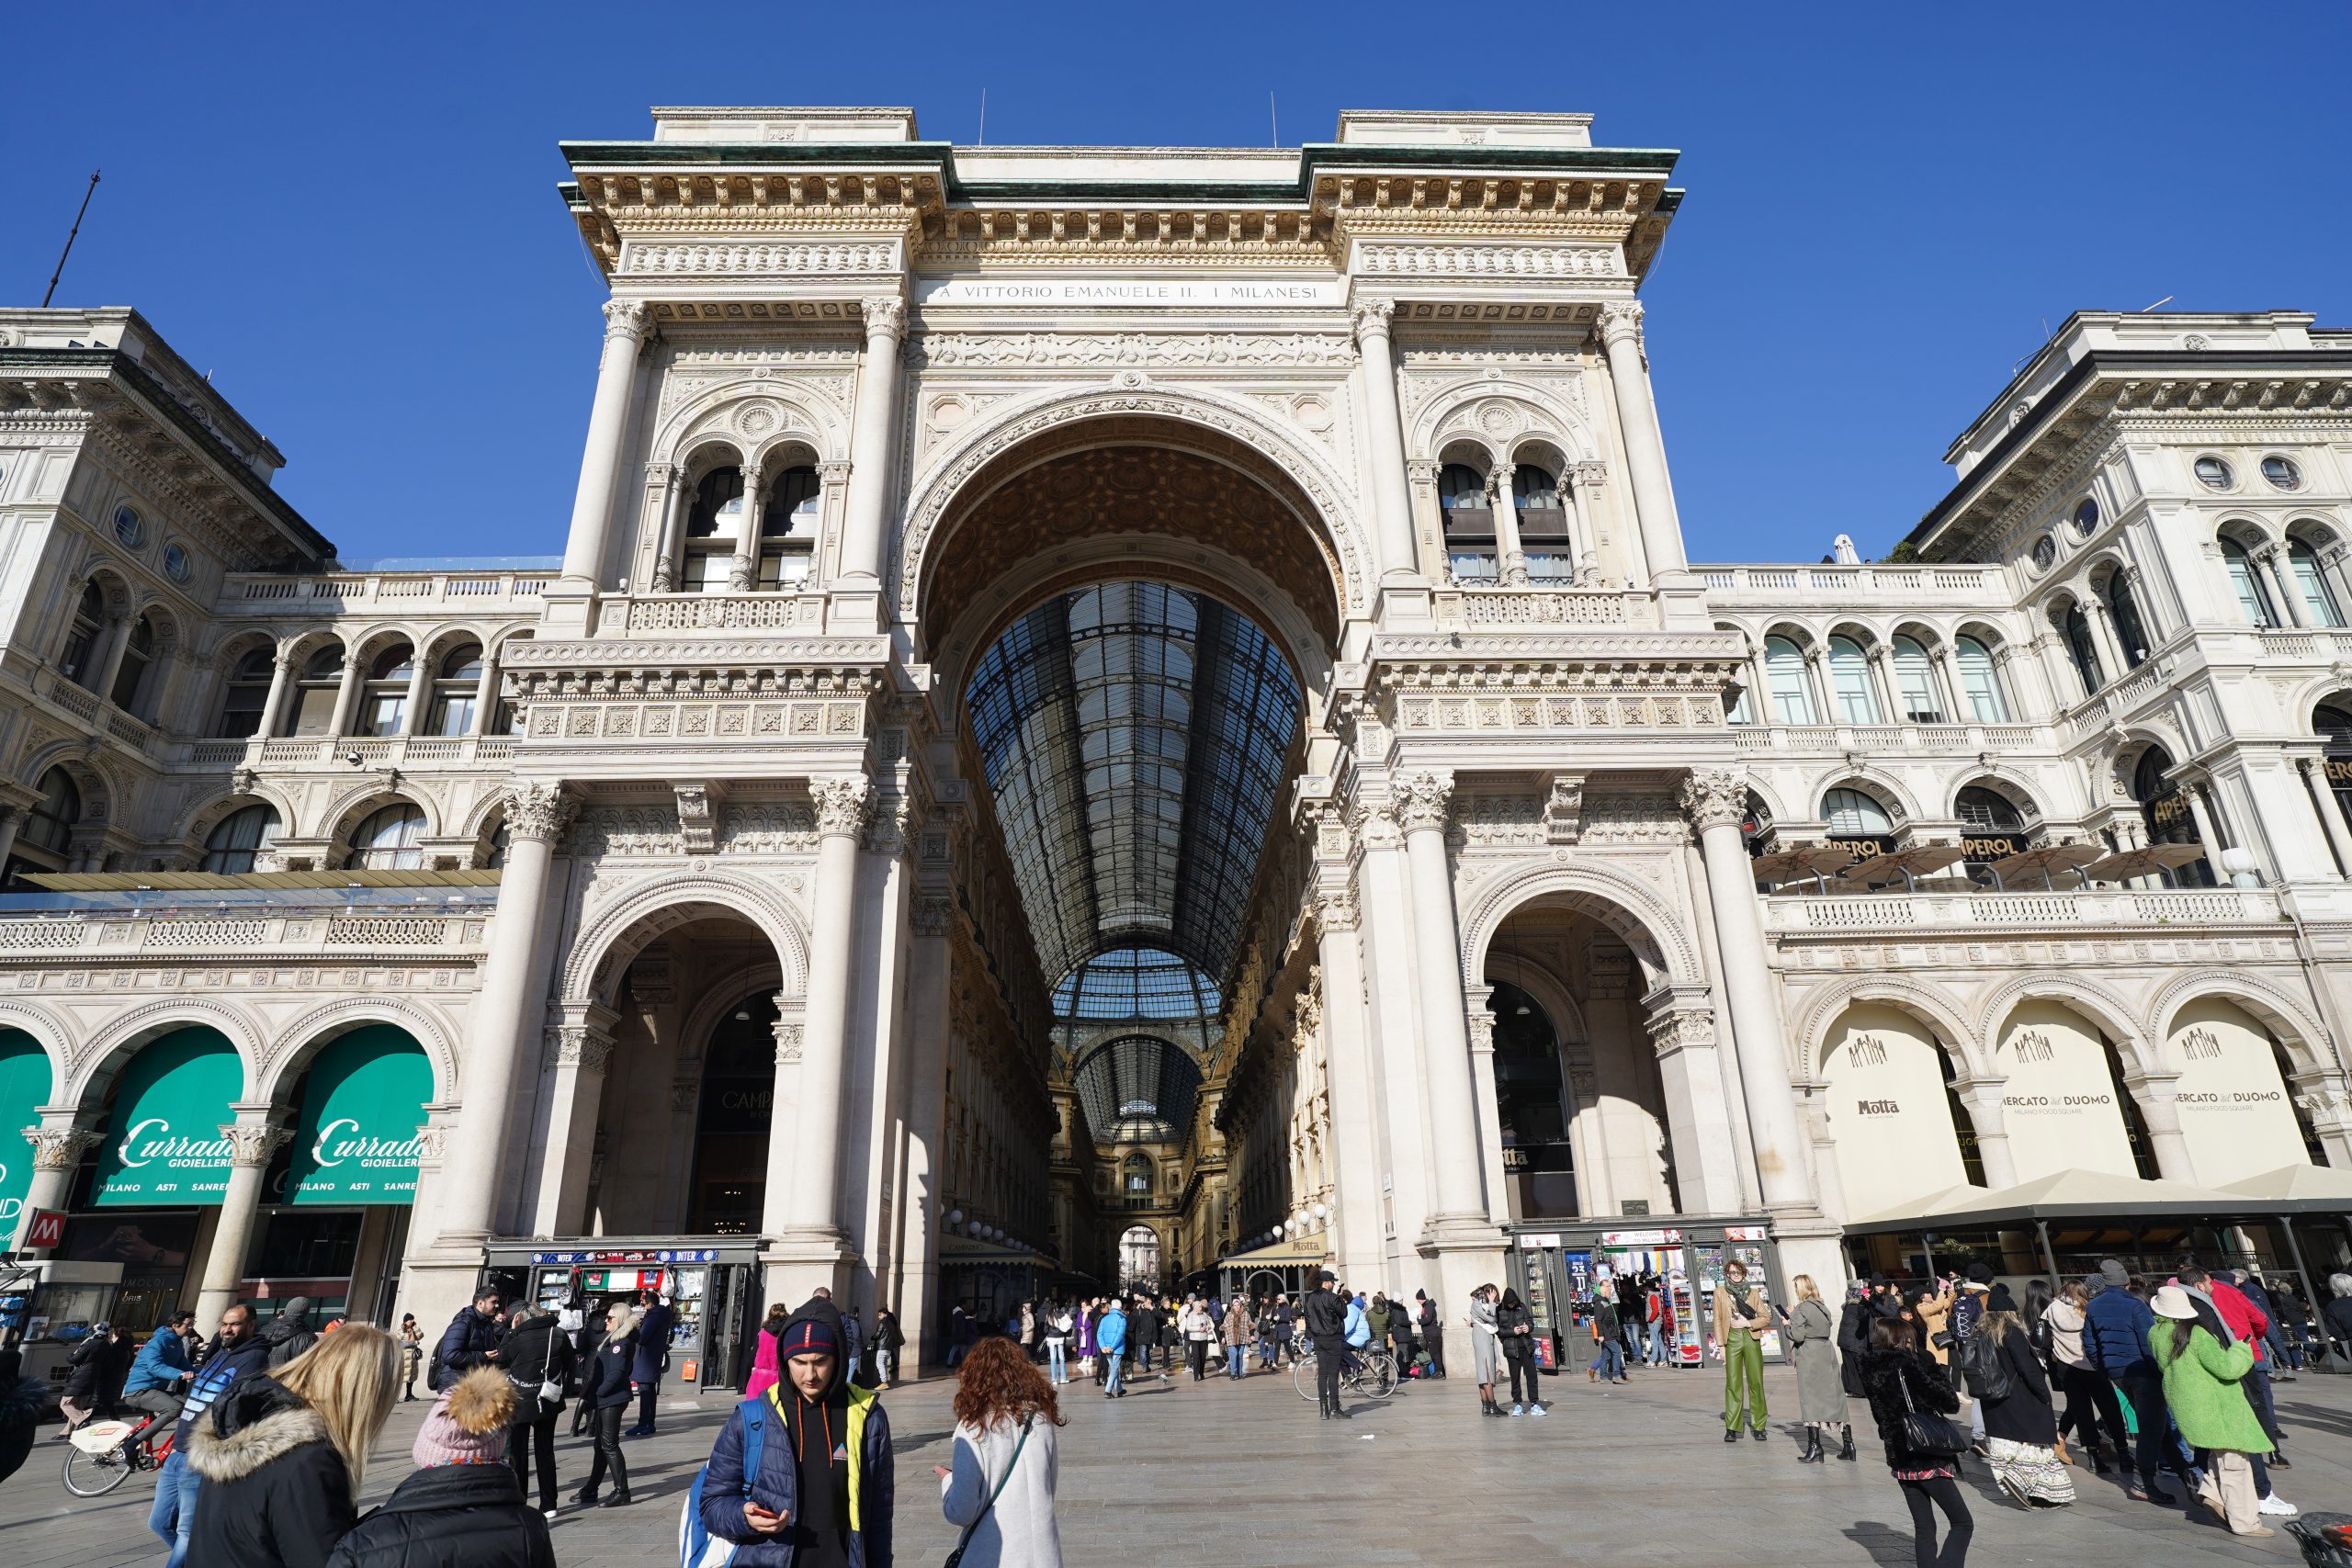 Galleria Vittorio Emanuele II is one of the world's oldest shopping malls and was named after Victor Emmanuel II, the first king of the Kingdom of Italy.